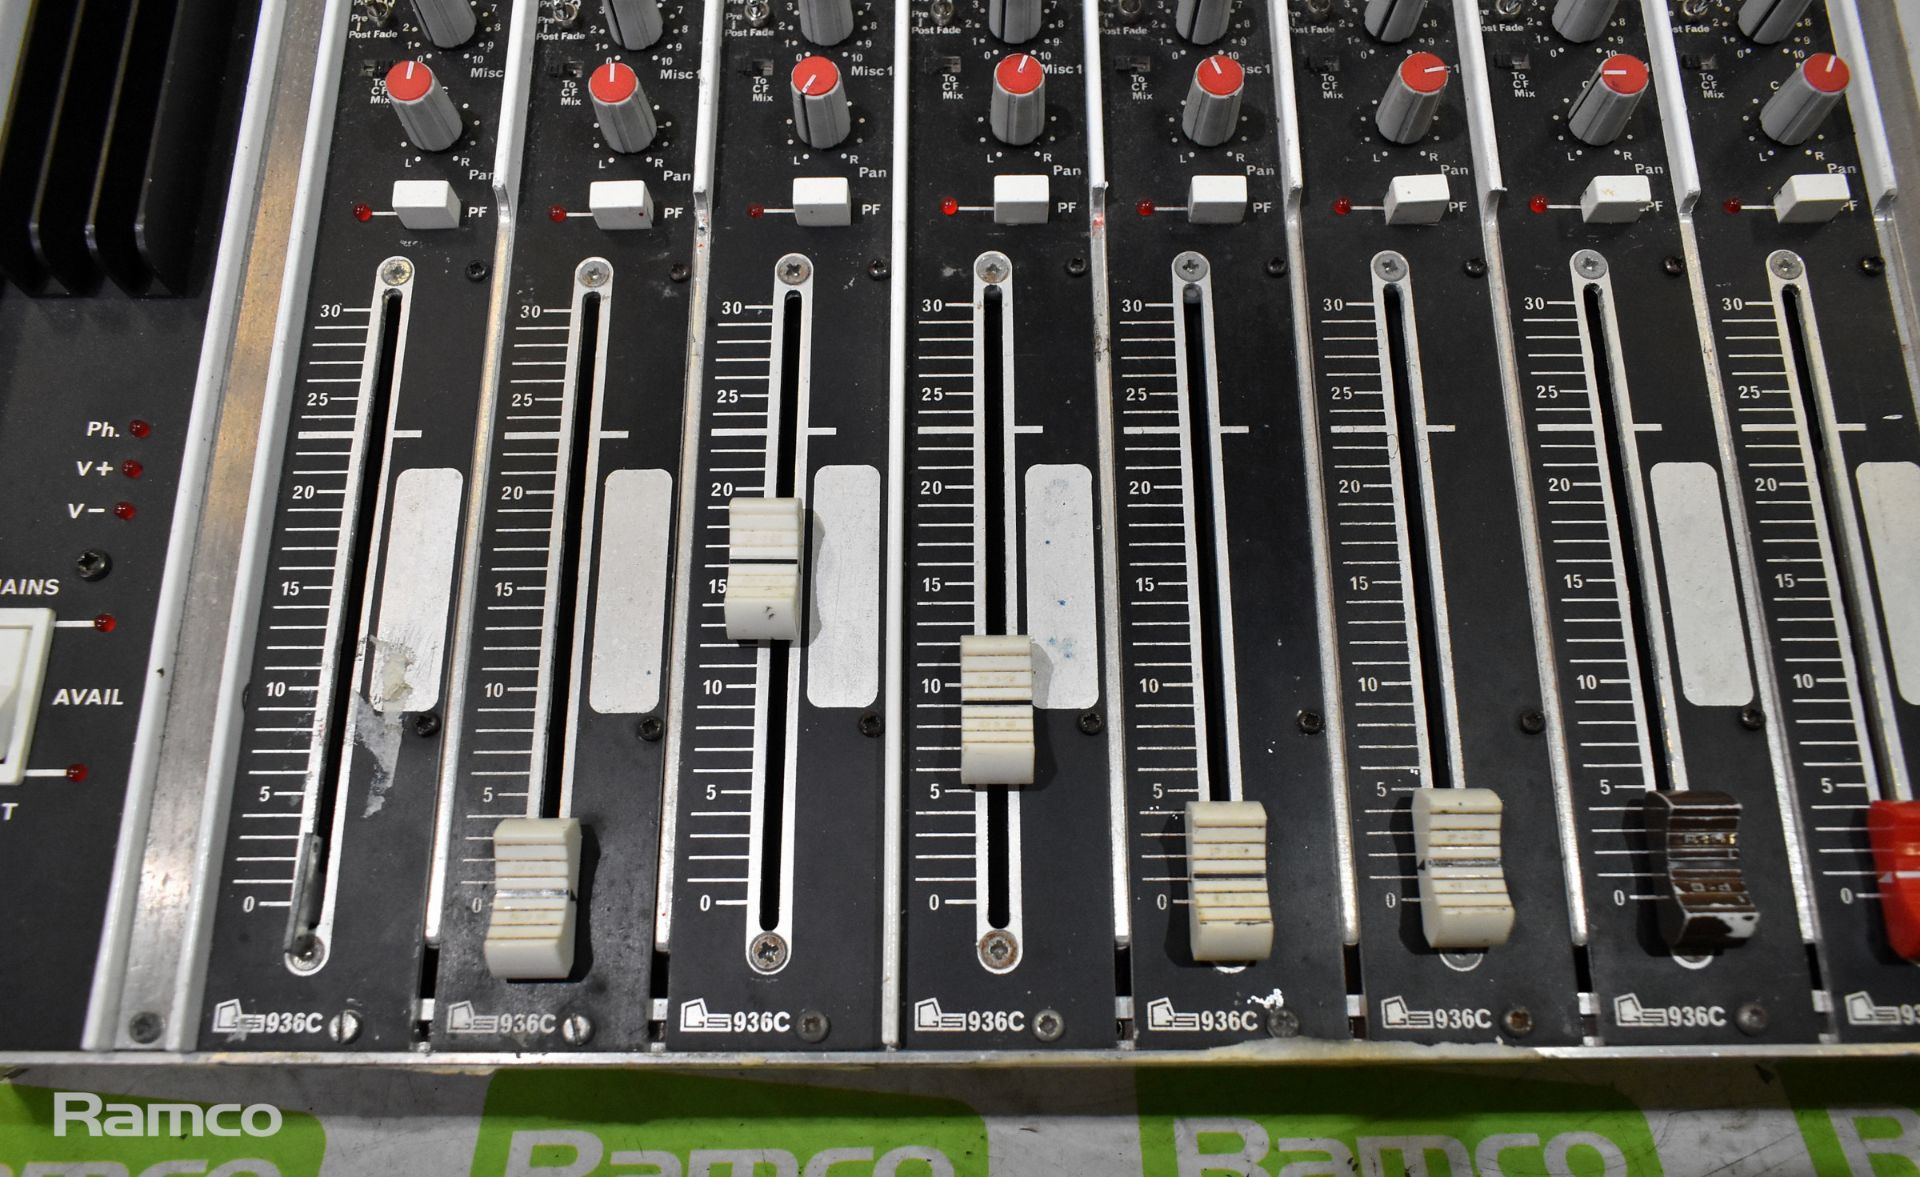 G.E.L. MX6 C2S/302 sound mixer deck - W 380 x D 420 x H 170 mm - Image 3 of 4